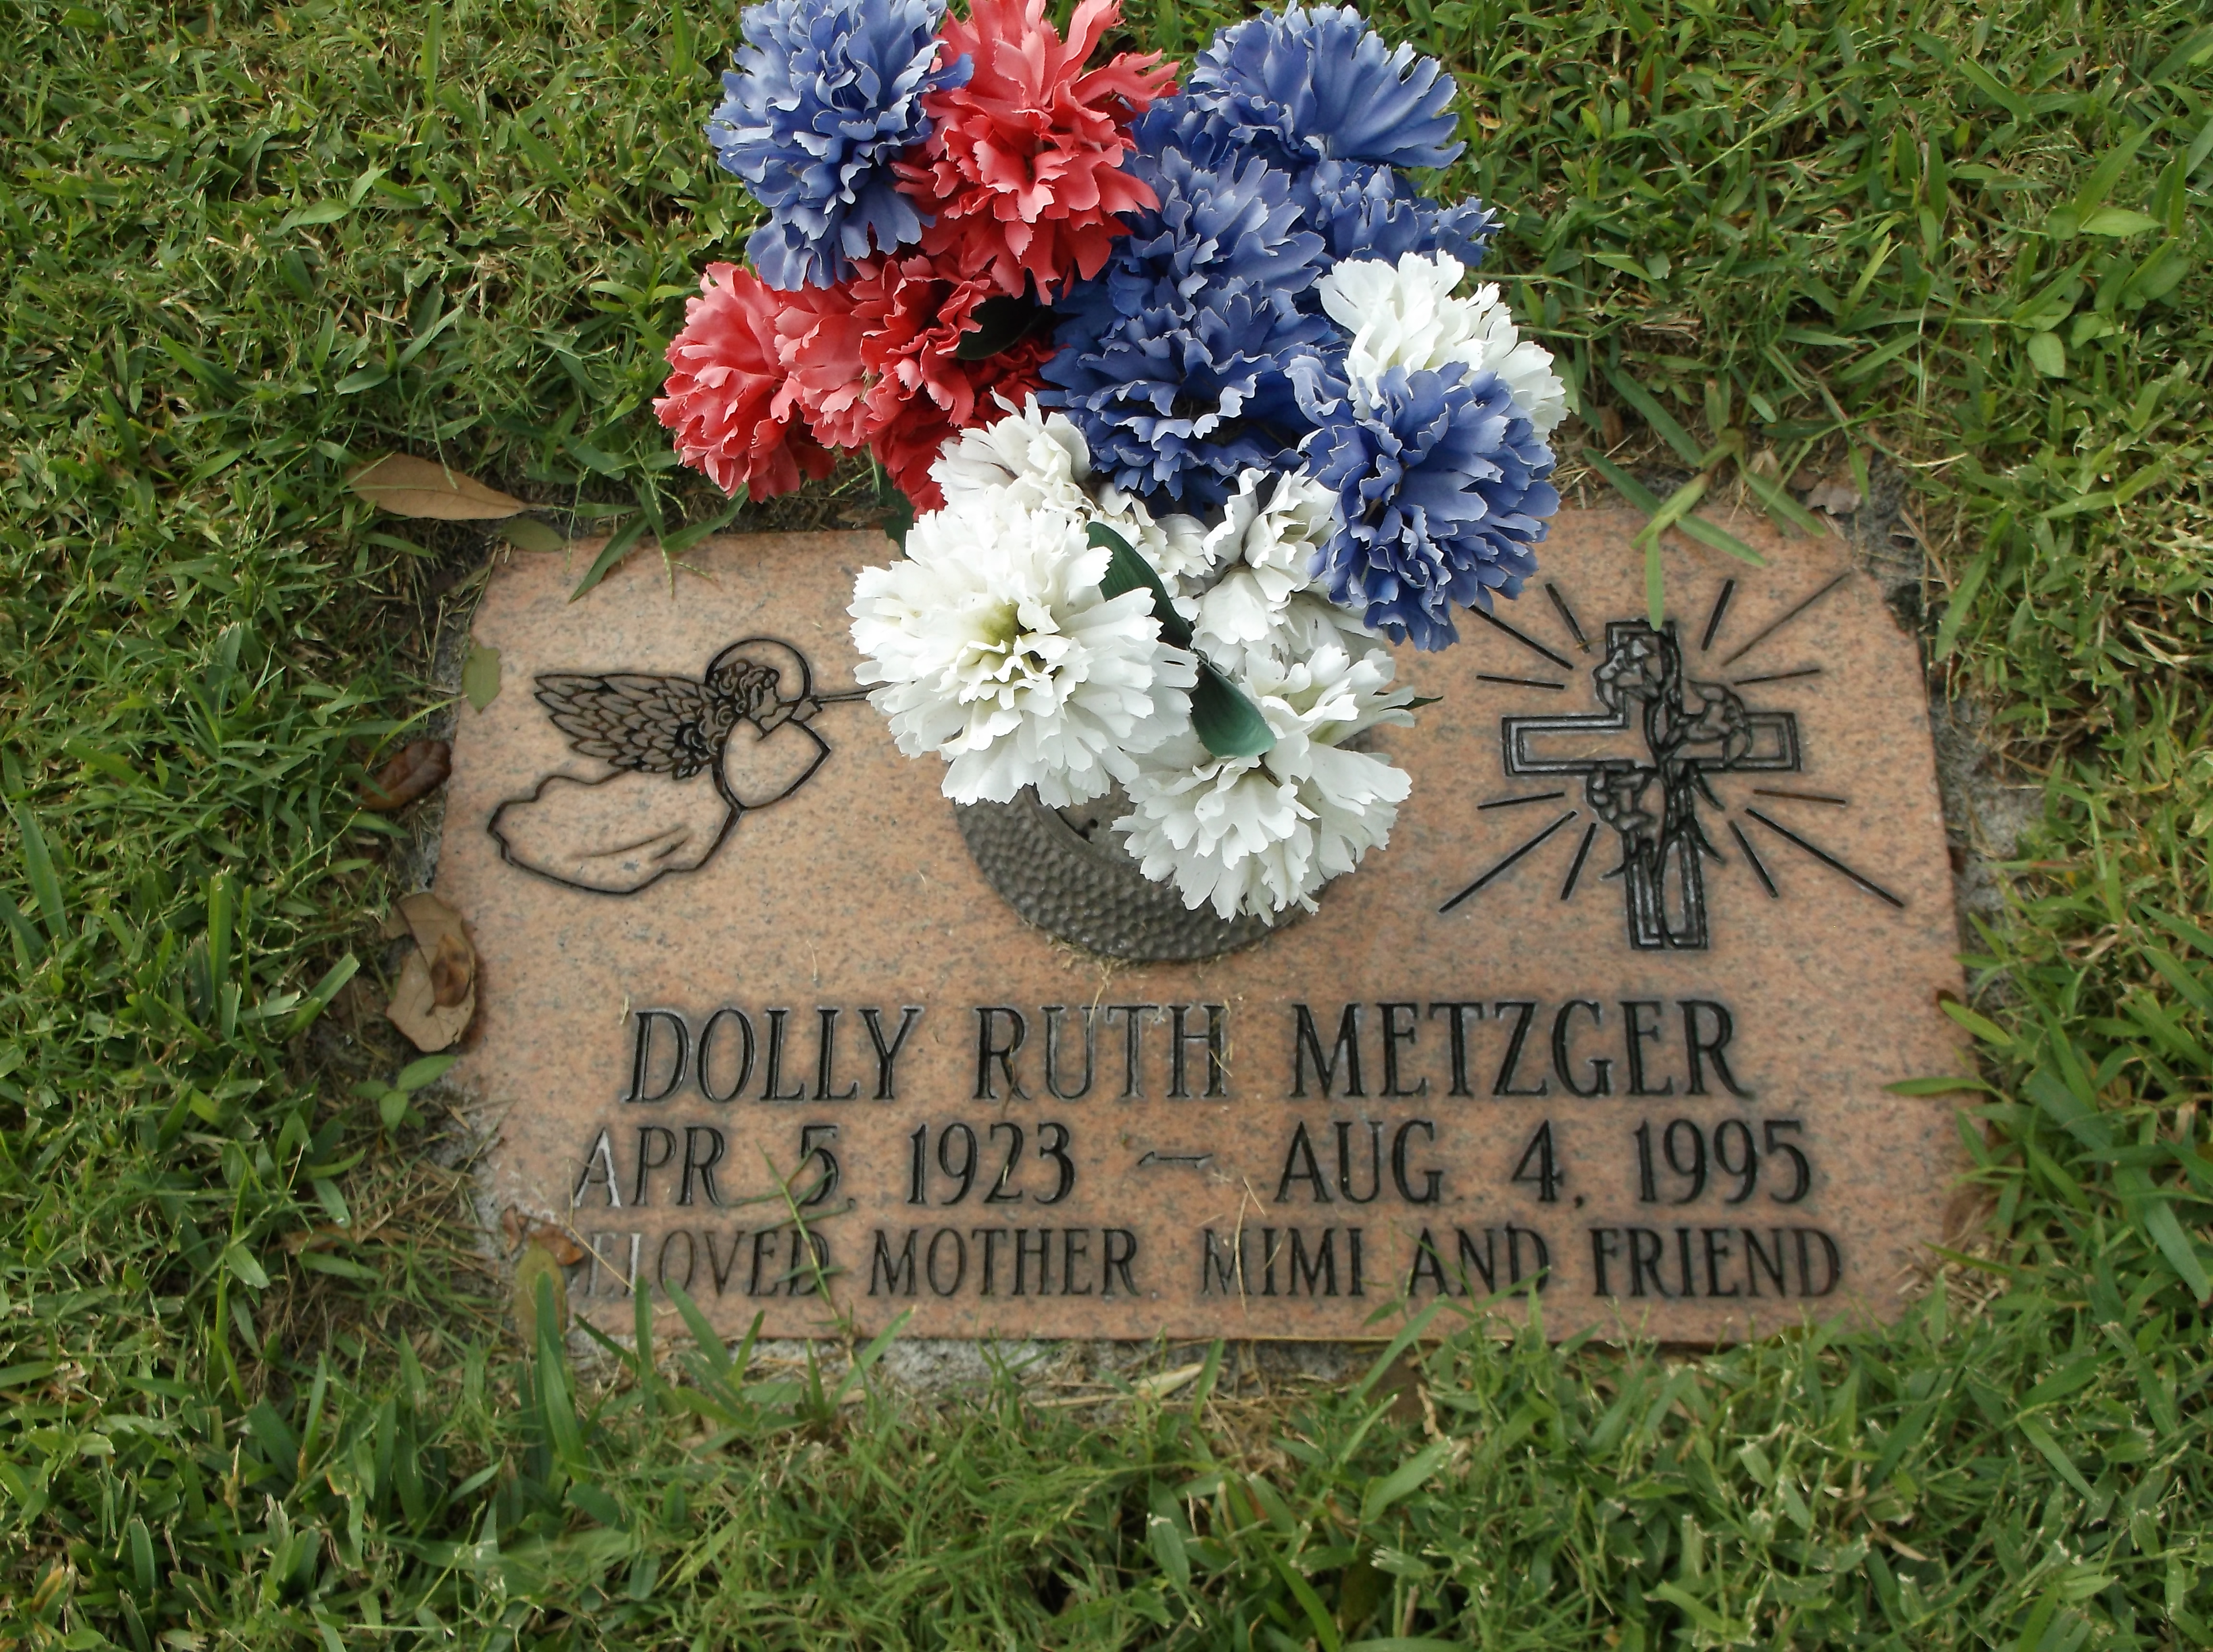 Dolly Ruth Metzger